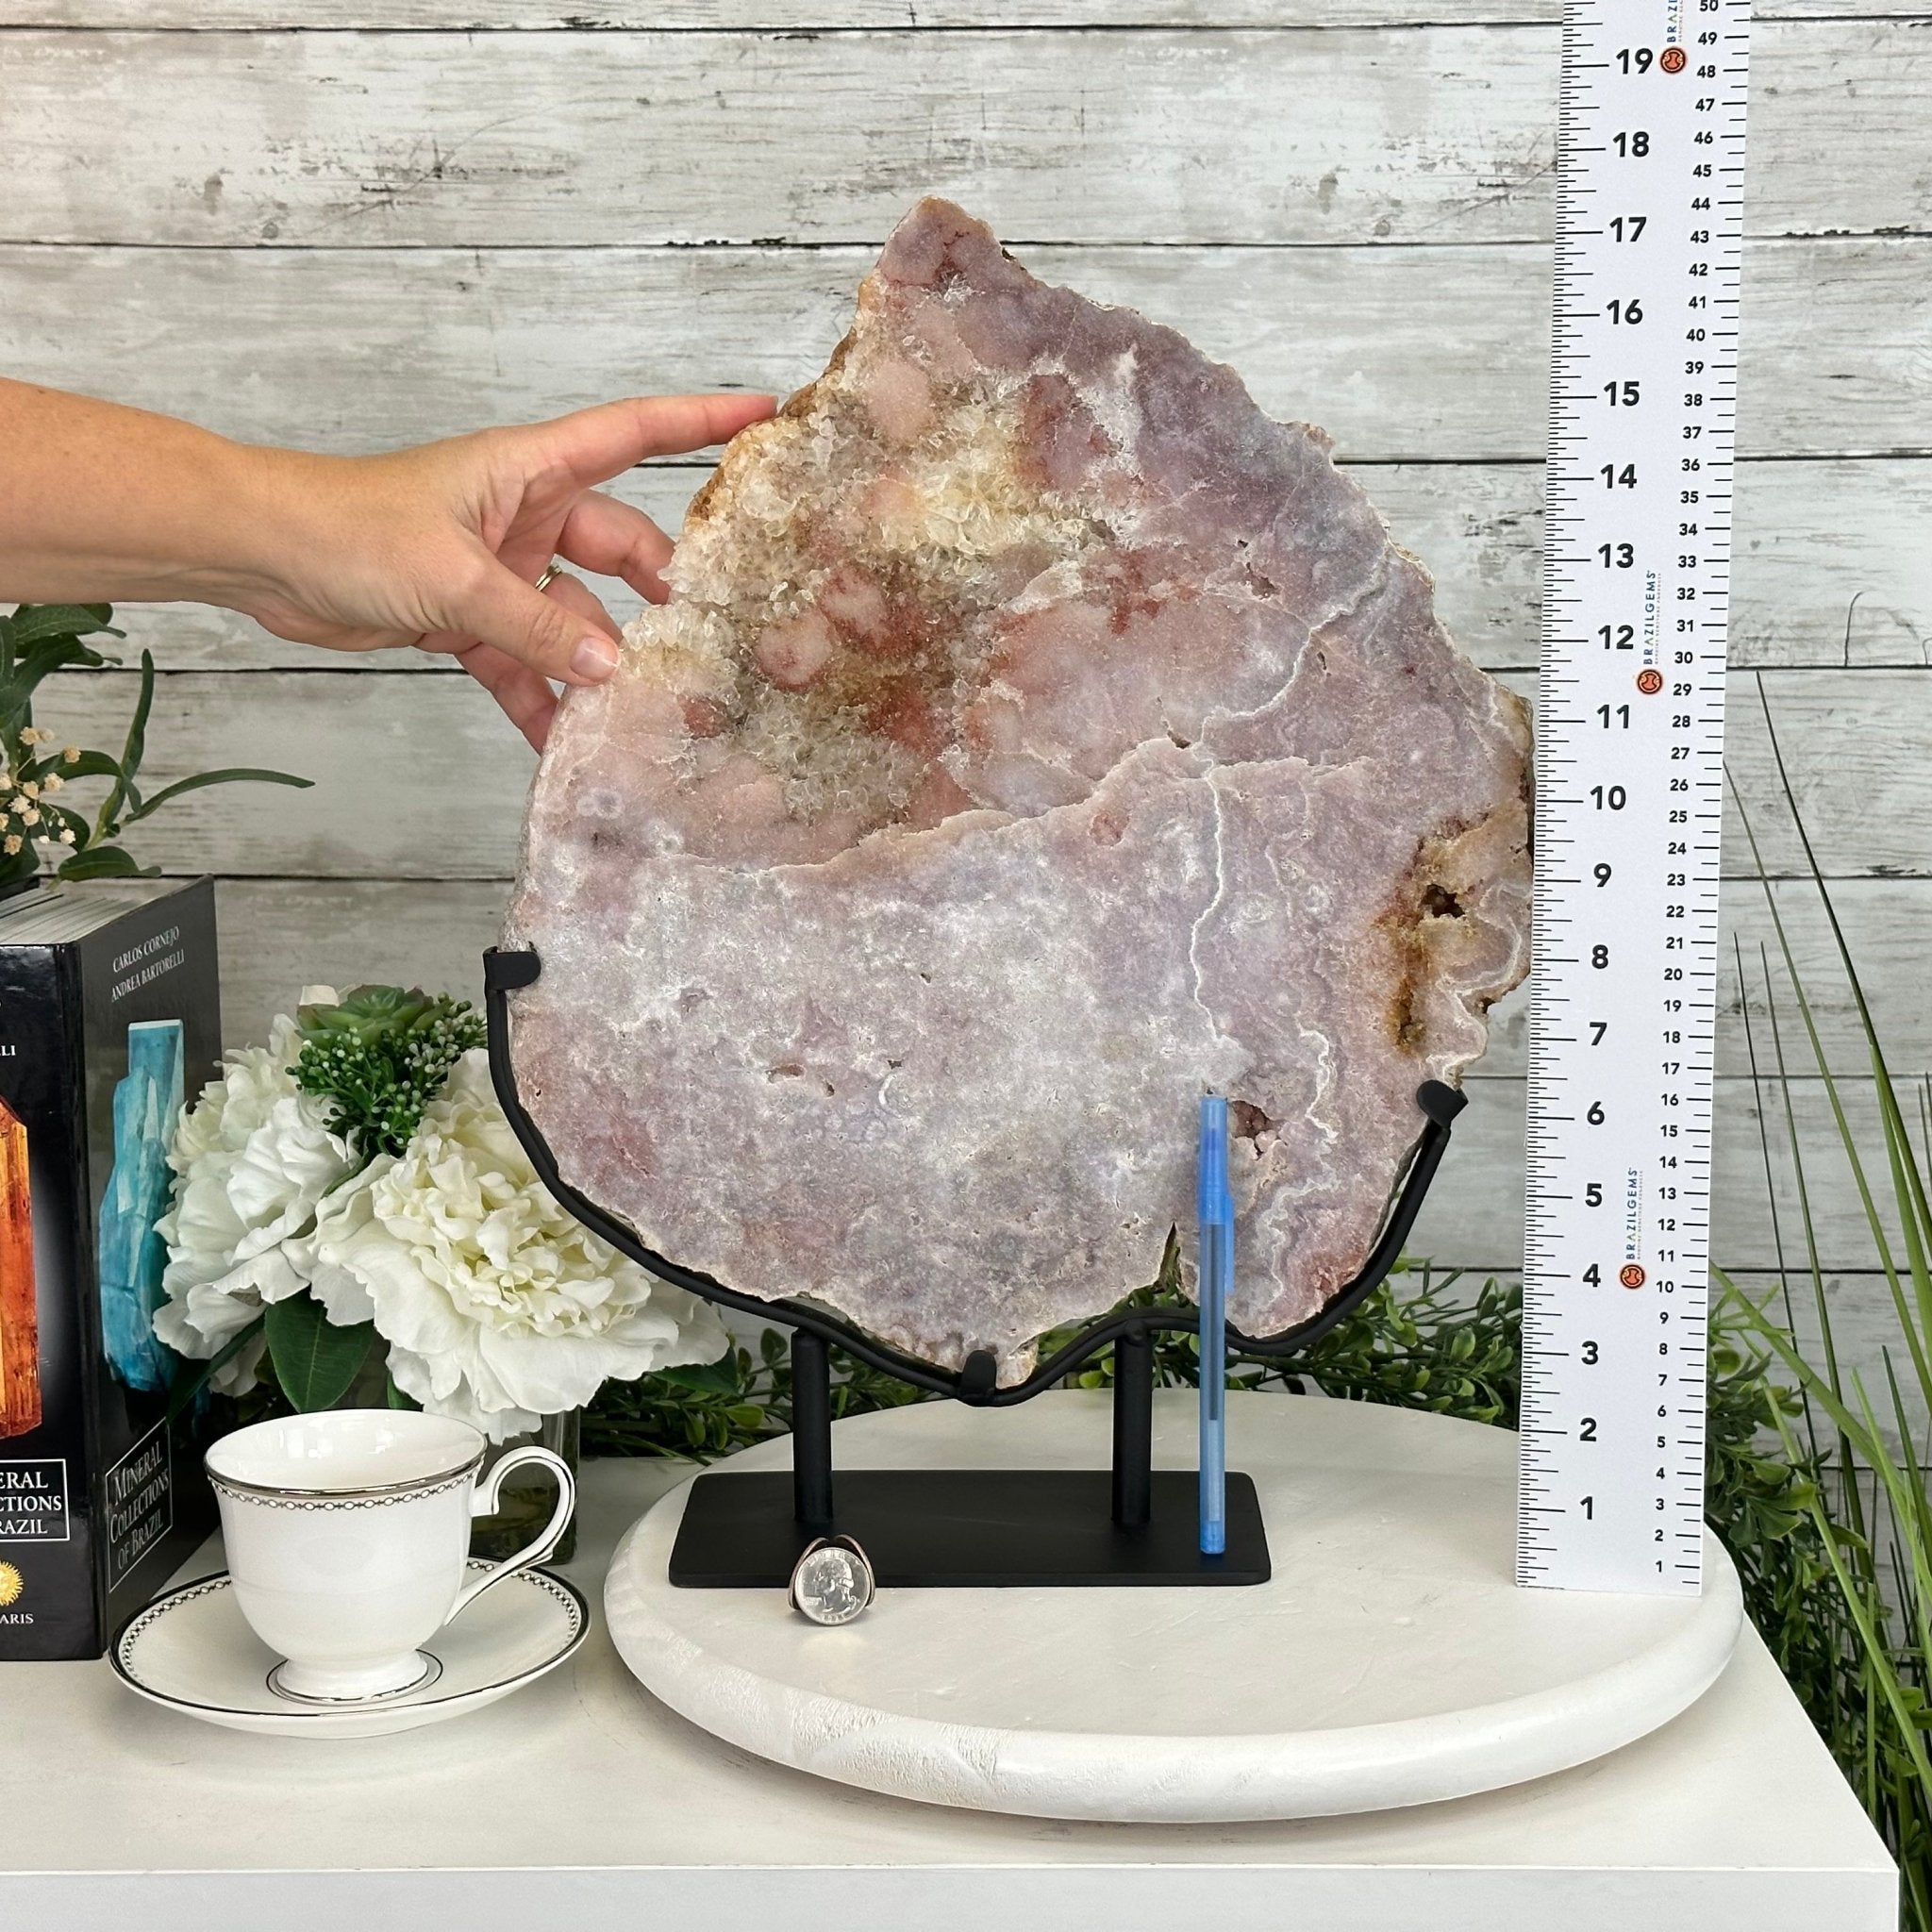 Polished Pink Amethyst Slice on a Stand, 11.8 lbs, 17.5" Tall #5743-0011 by Brazil Gems - Brazil GemsBrazil GemsPolished Pink Amethyst Slice on a Stand, 11.8 lbs, 17.5" Tall #5743-0011 by Brazil GemsSlices on Fixed Bases5743-0011